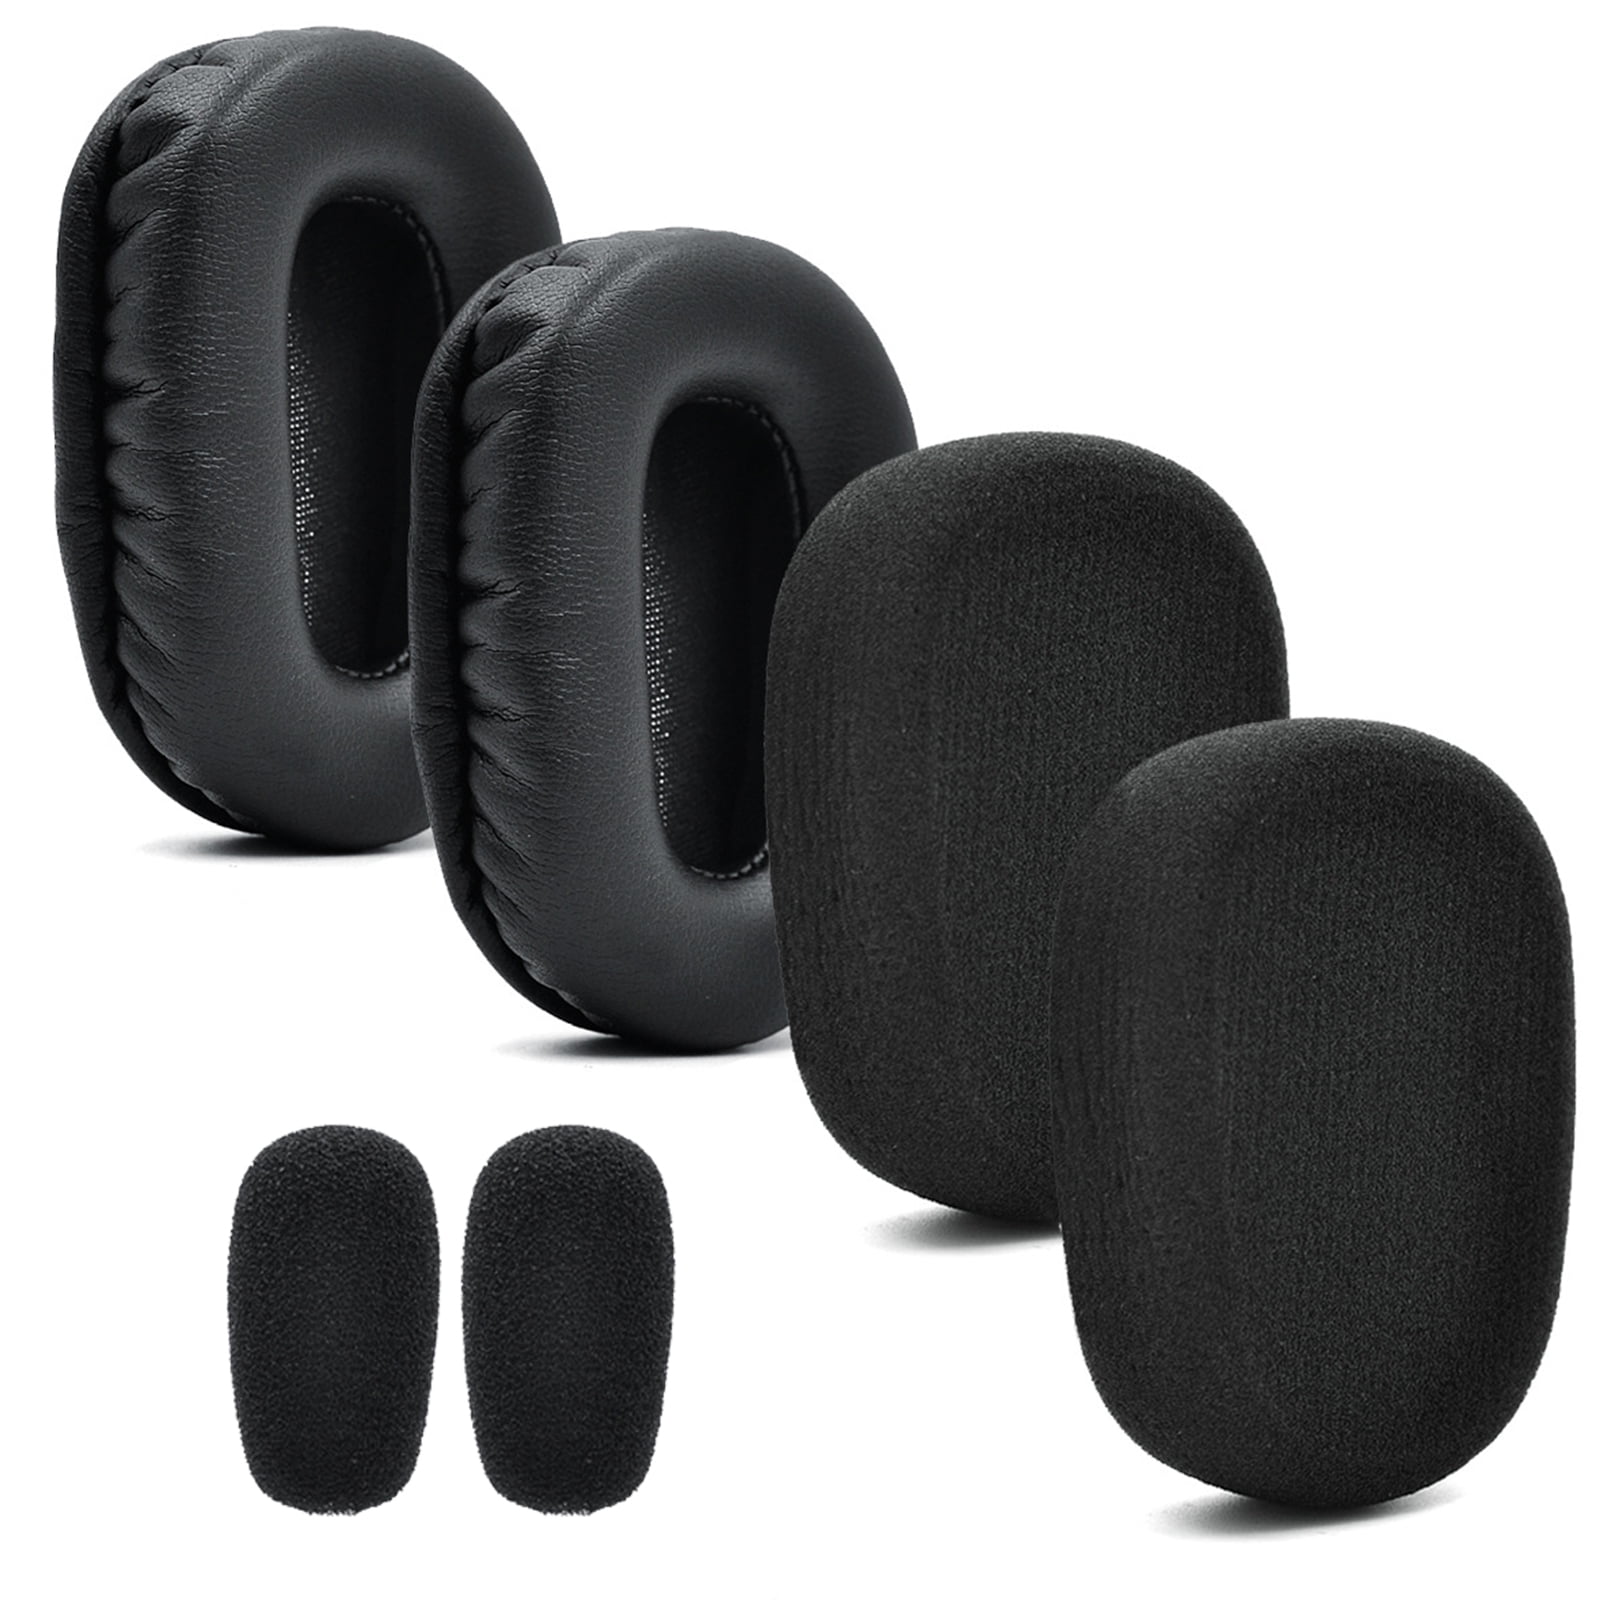 Specialized Air Express Aftermarket Helmet Replacement Foam Pads Cushions Kit 